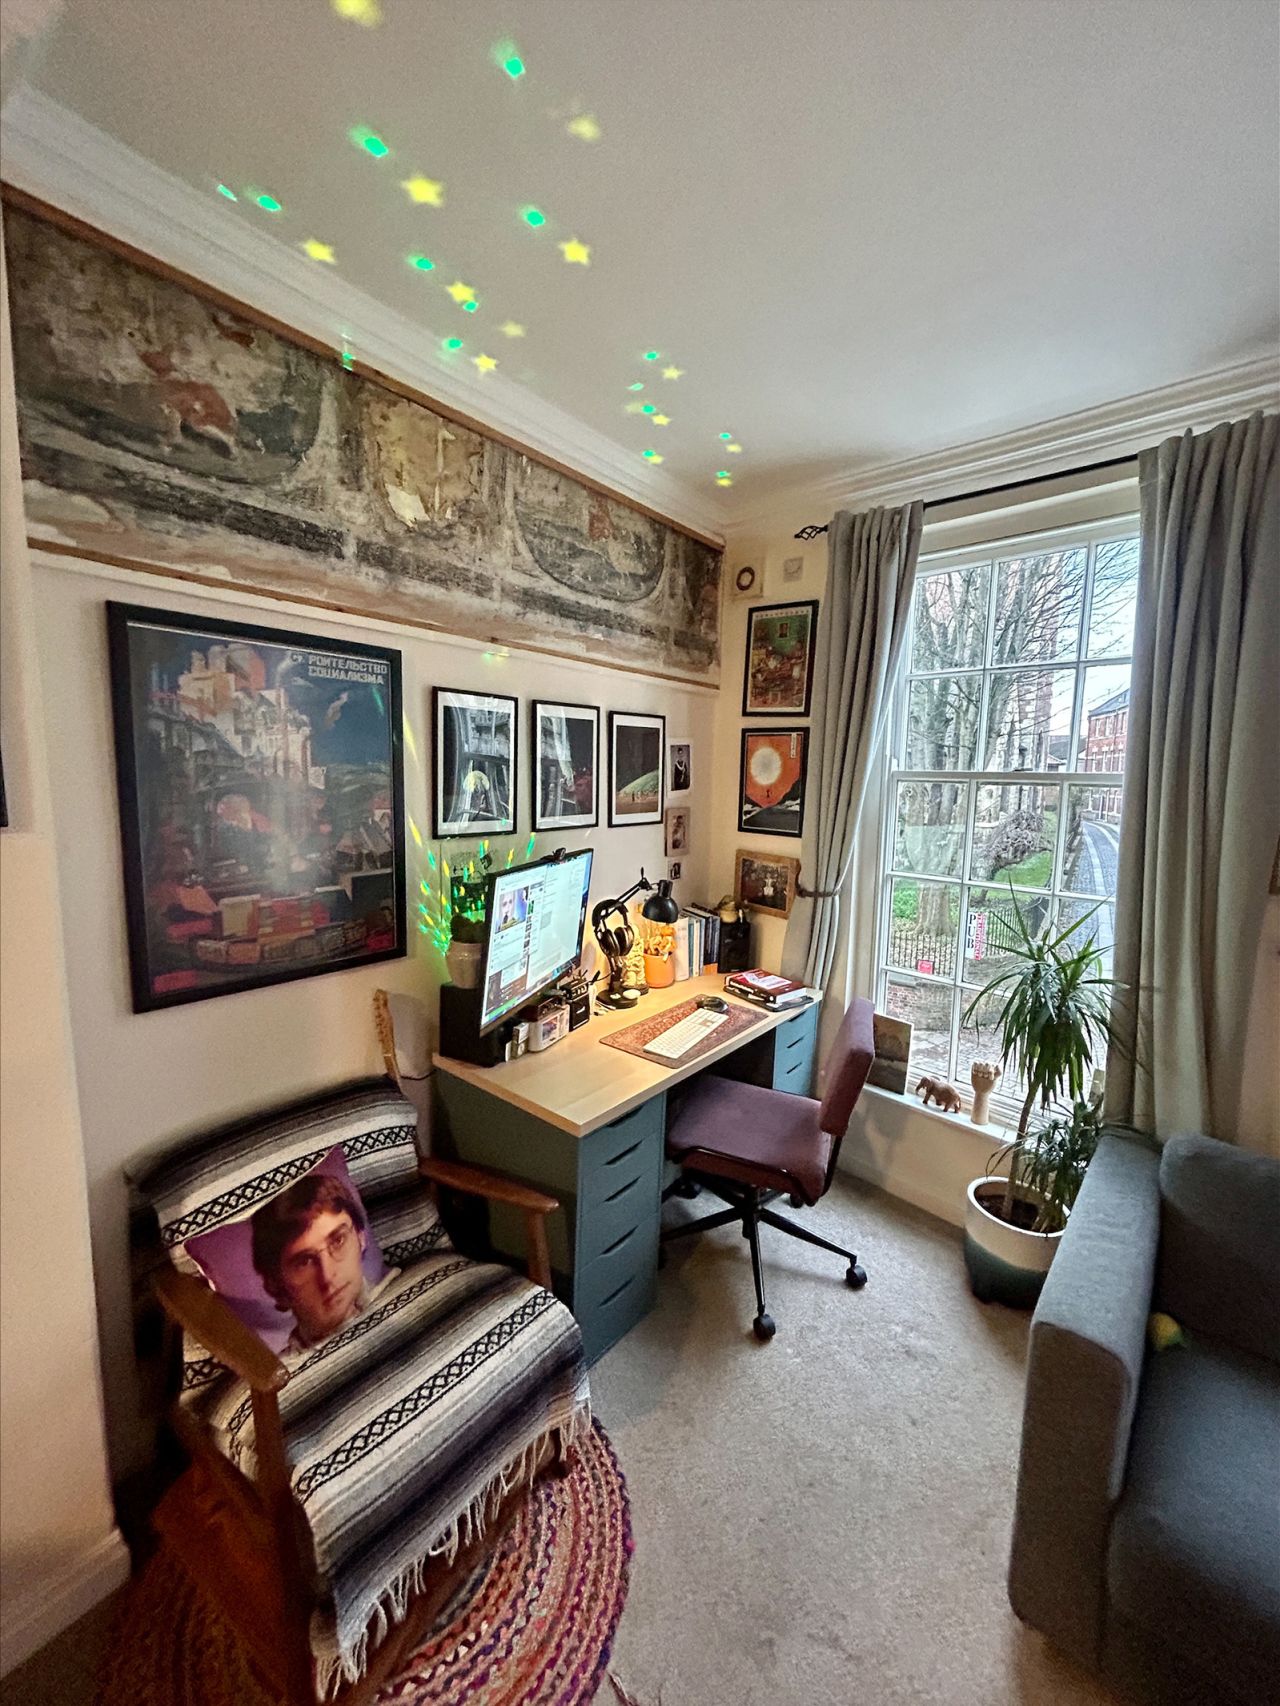 Two friezes dating back nearly 400 years were discovered after renovation work at this one-bedroom apartment in York, England.
